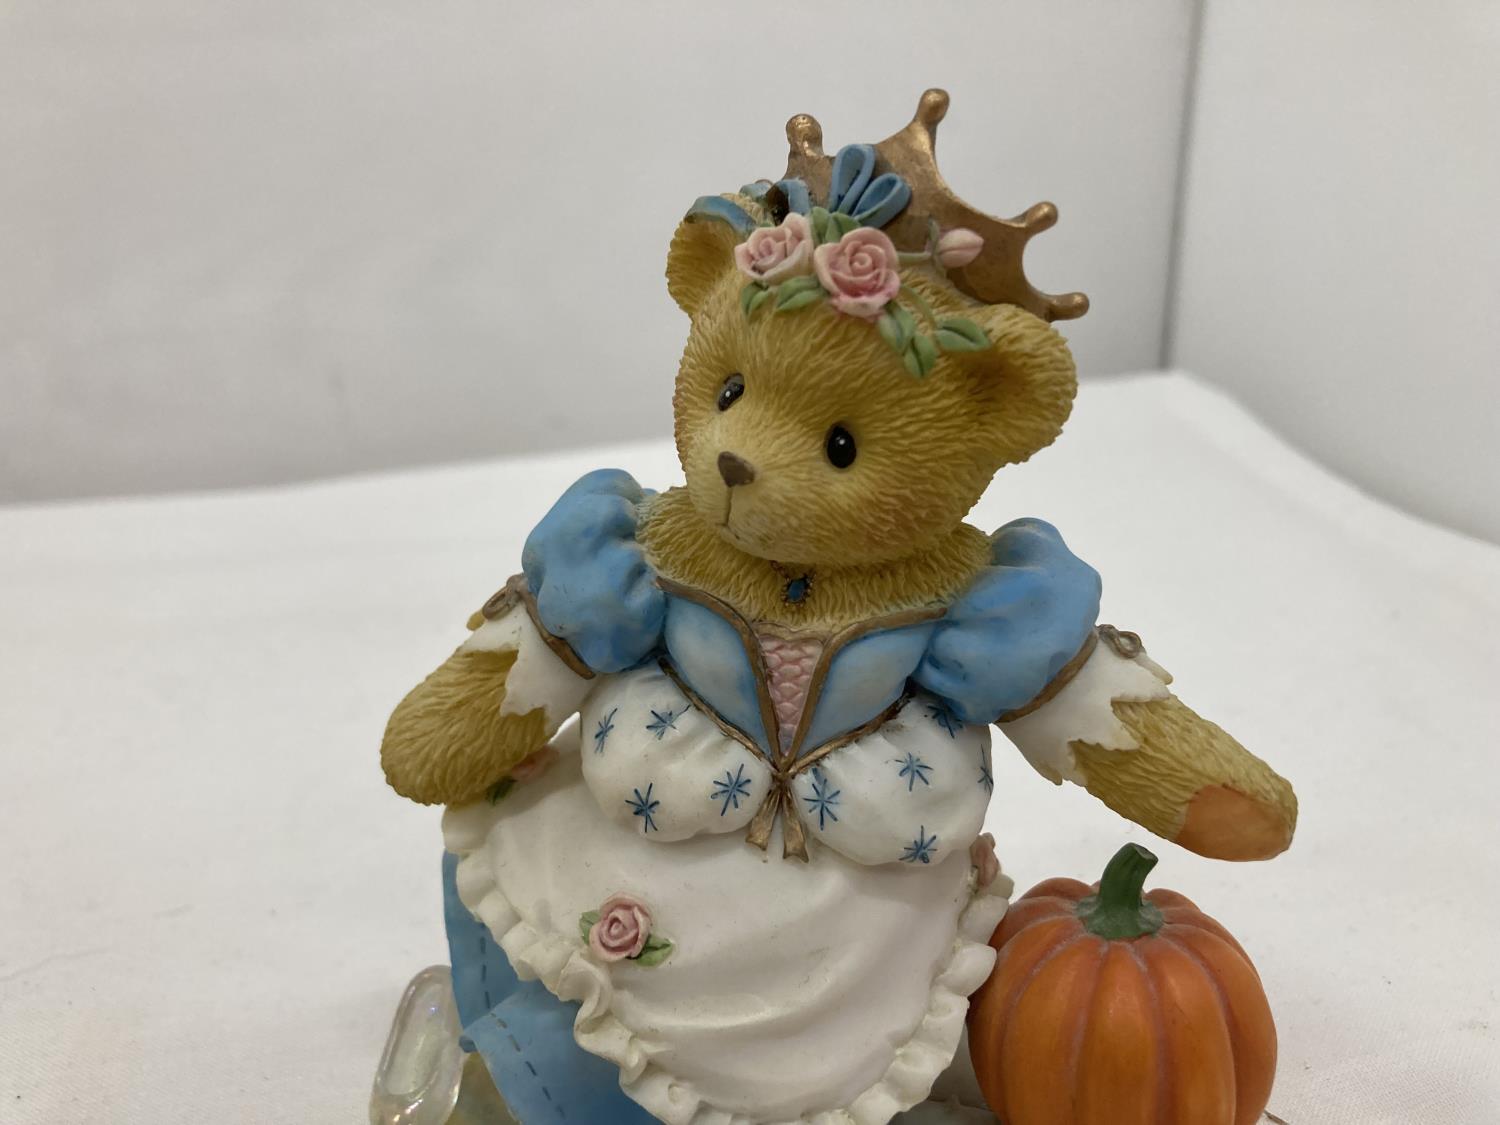 FOUR LIMITED EDITION CHERISHED TEDDIES, 'CHRISTINA', 'ROBIN', 'HALEY AND LOGAN', AND 'JUDY' - Image 6 of 12